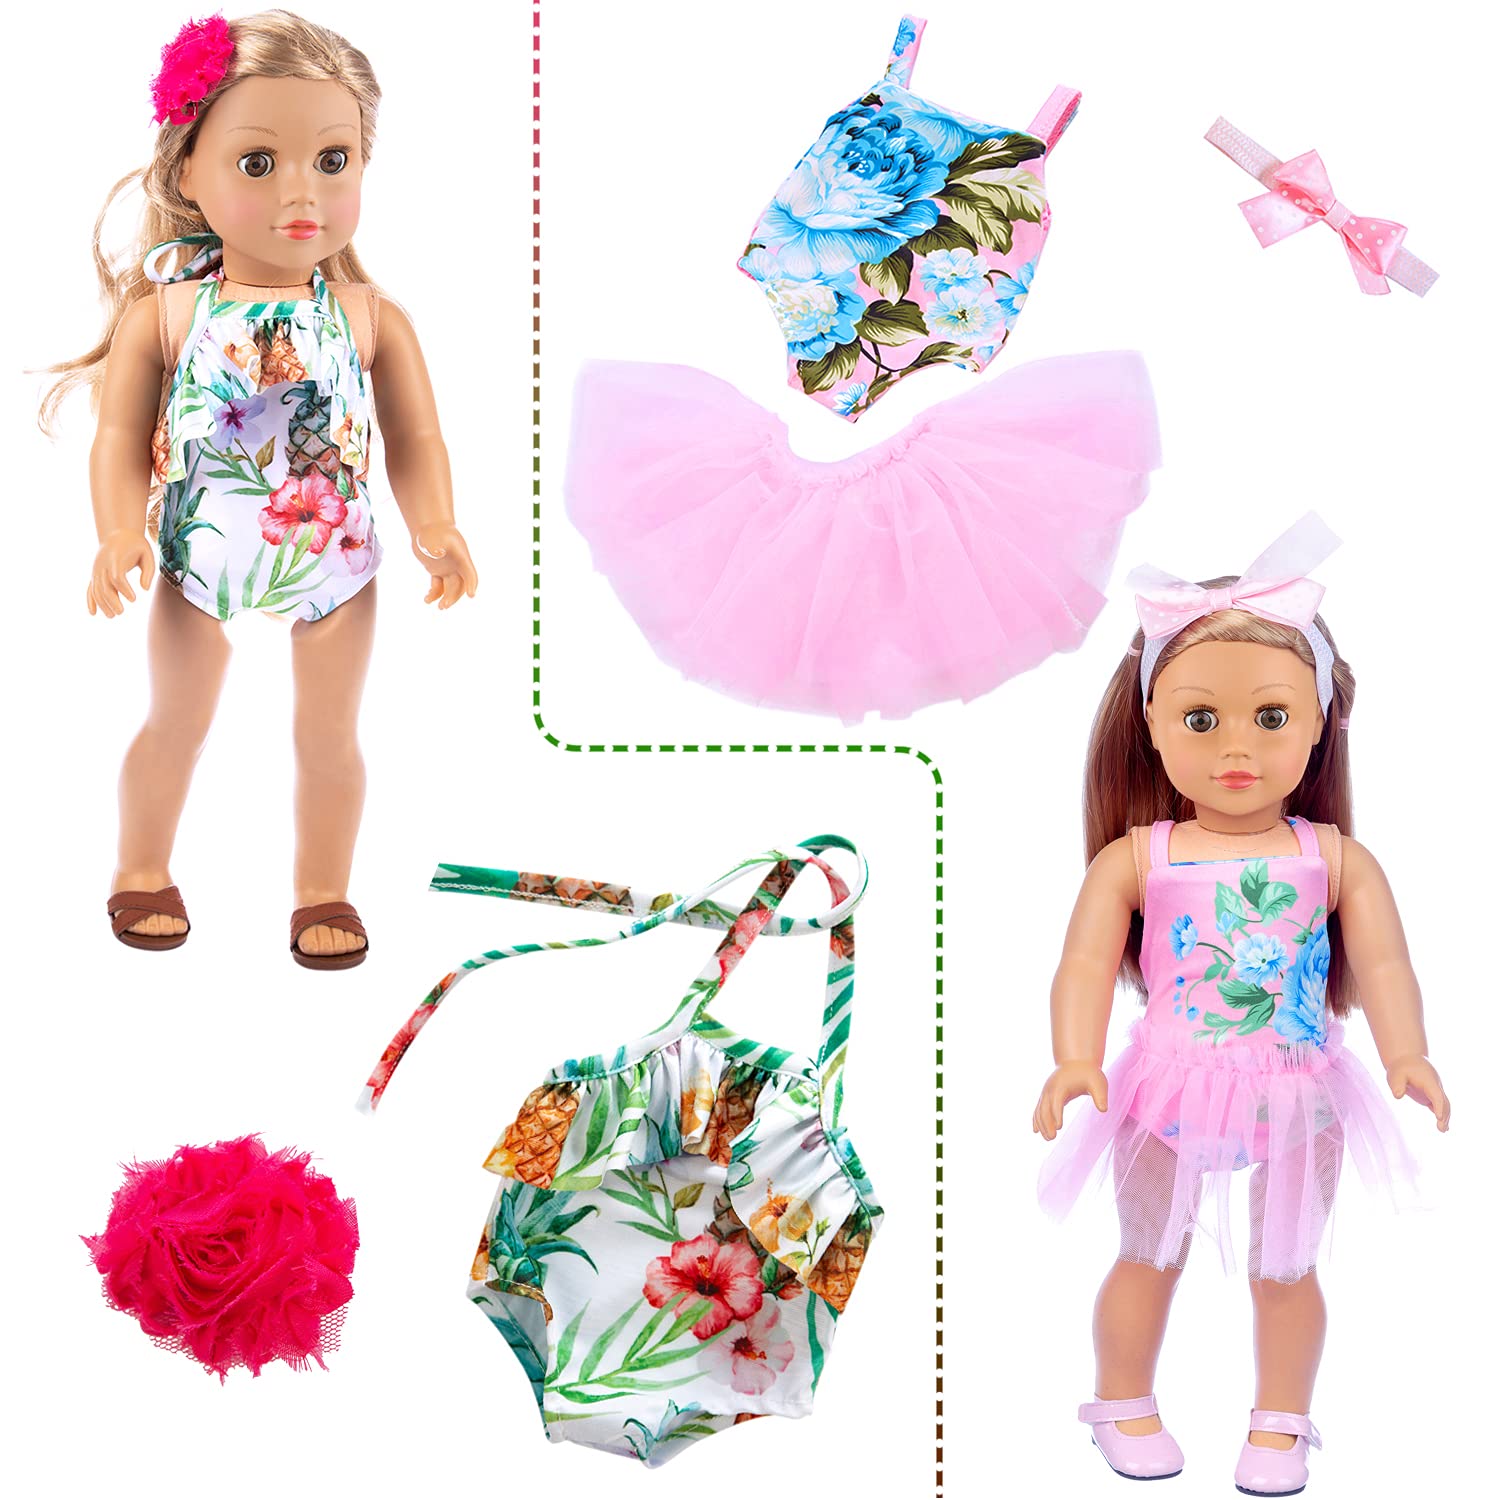 ZITA ELEMENT 24 Pcs American 18 Inch Girl Doll Clothes Dress and Accessories - Including 10 Complete Set of Clothing Outfits with Hair Bands, Hair Clips, Crown and Cap